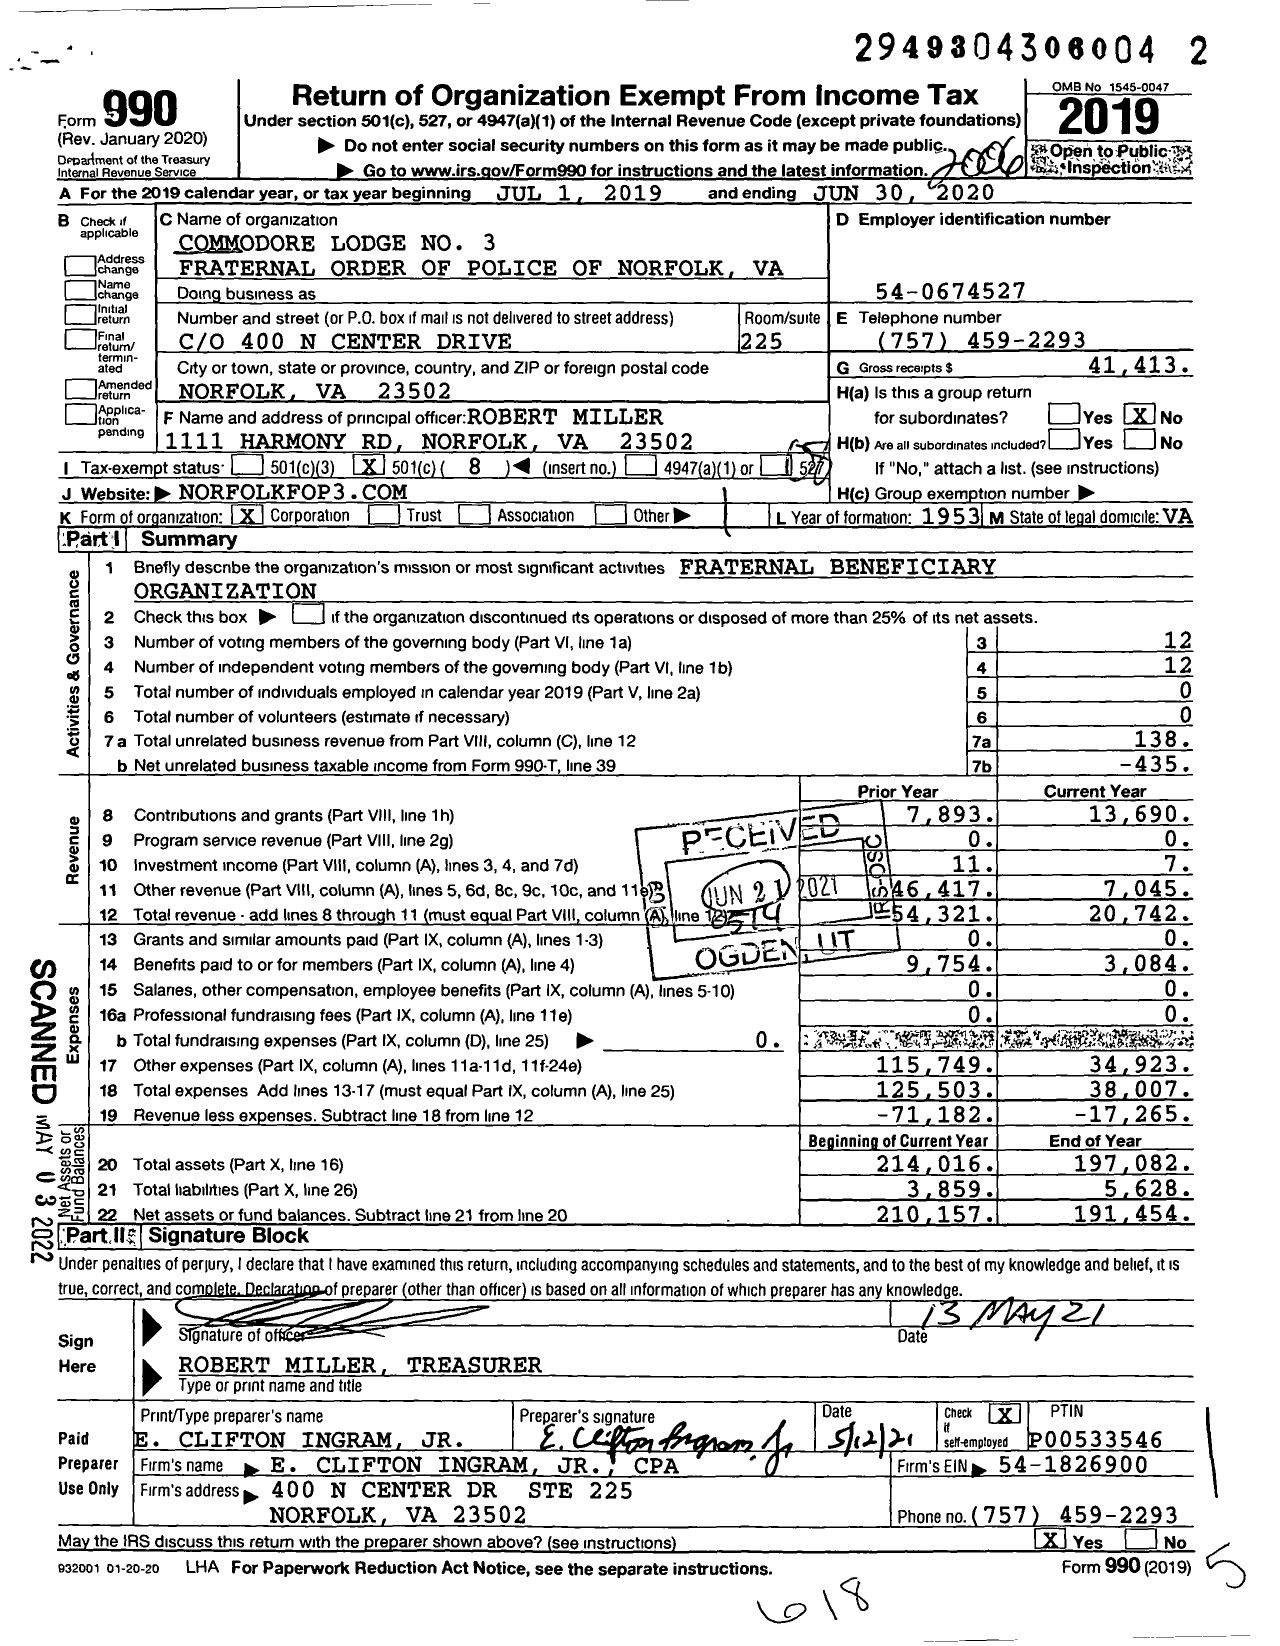 Image of first page of 2019 Form 990O for Fraternal Order of Police - 3 Commodore Lodge